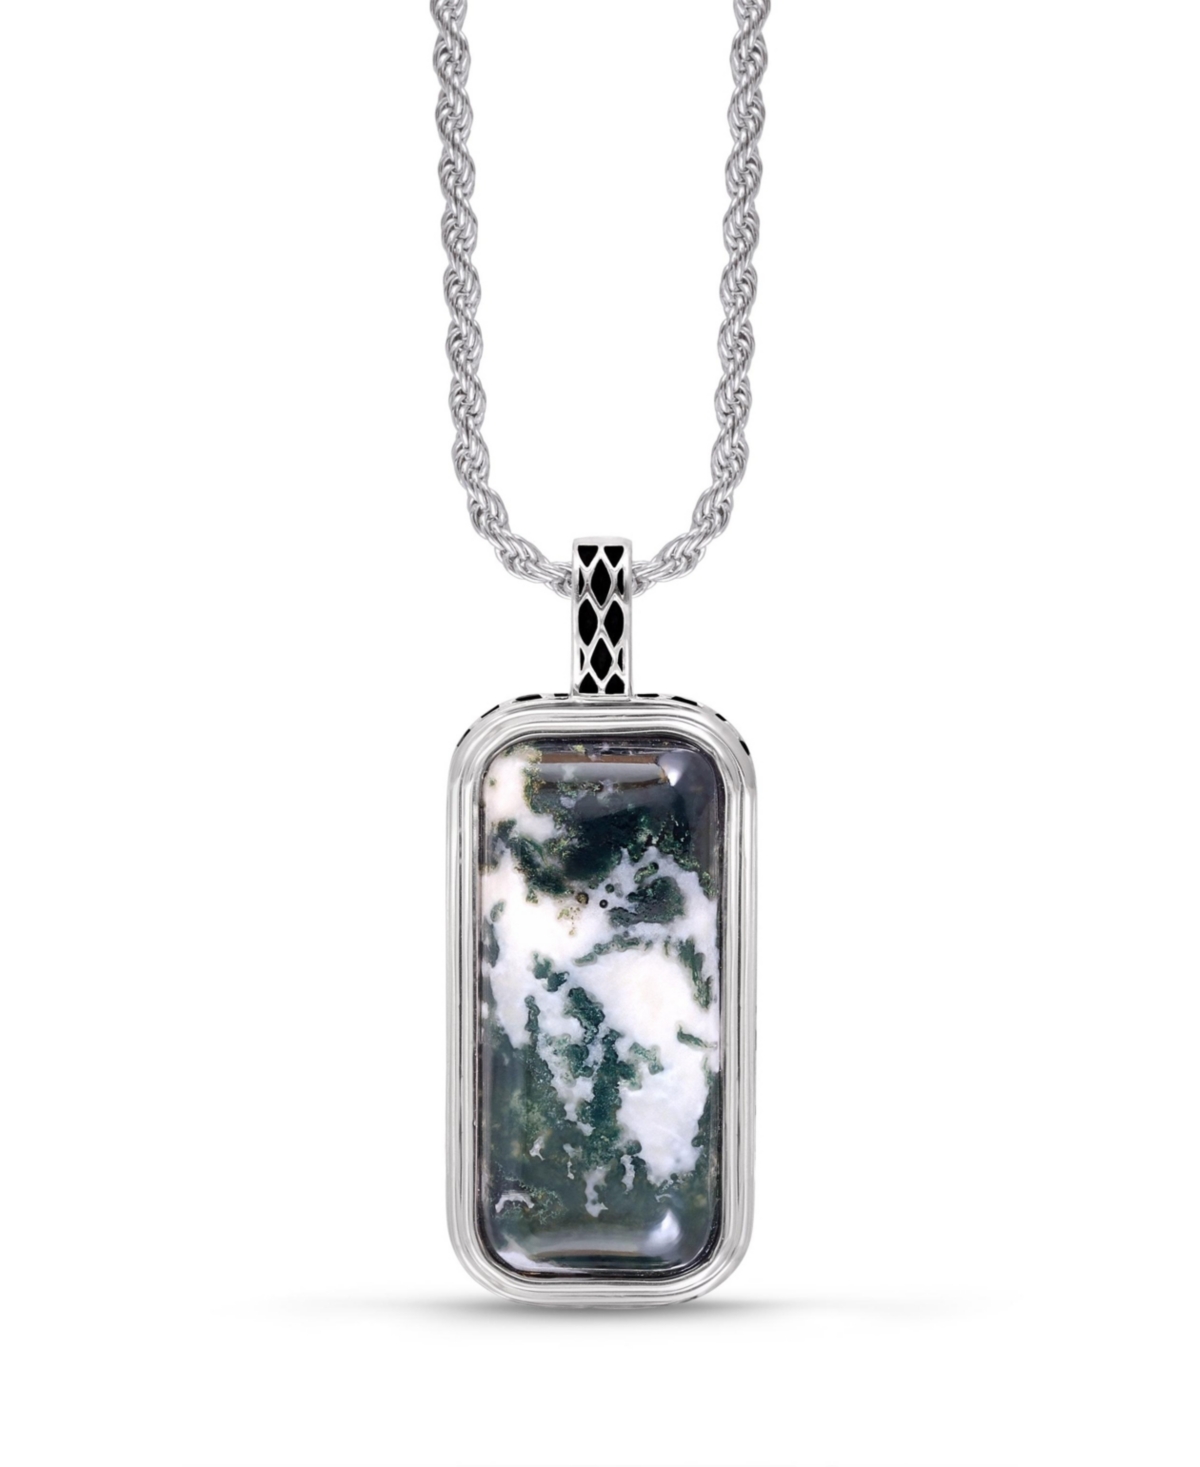 LUVMYJEWELRY TREE AGATE GEMSTONE STERLING SILVER MEN TAG IN BLACK RHODIUM PLATED WITH CHAIN